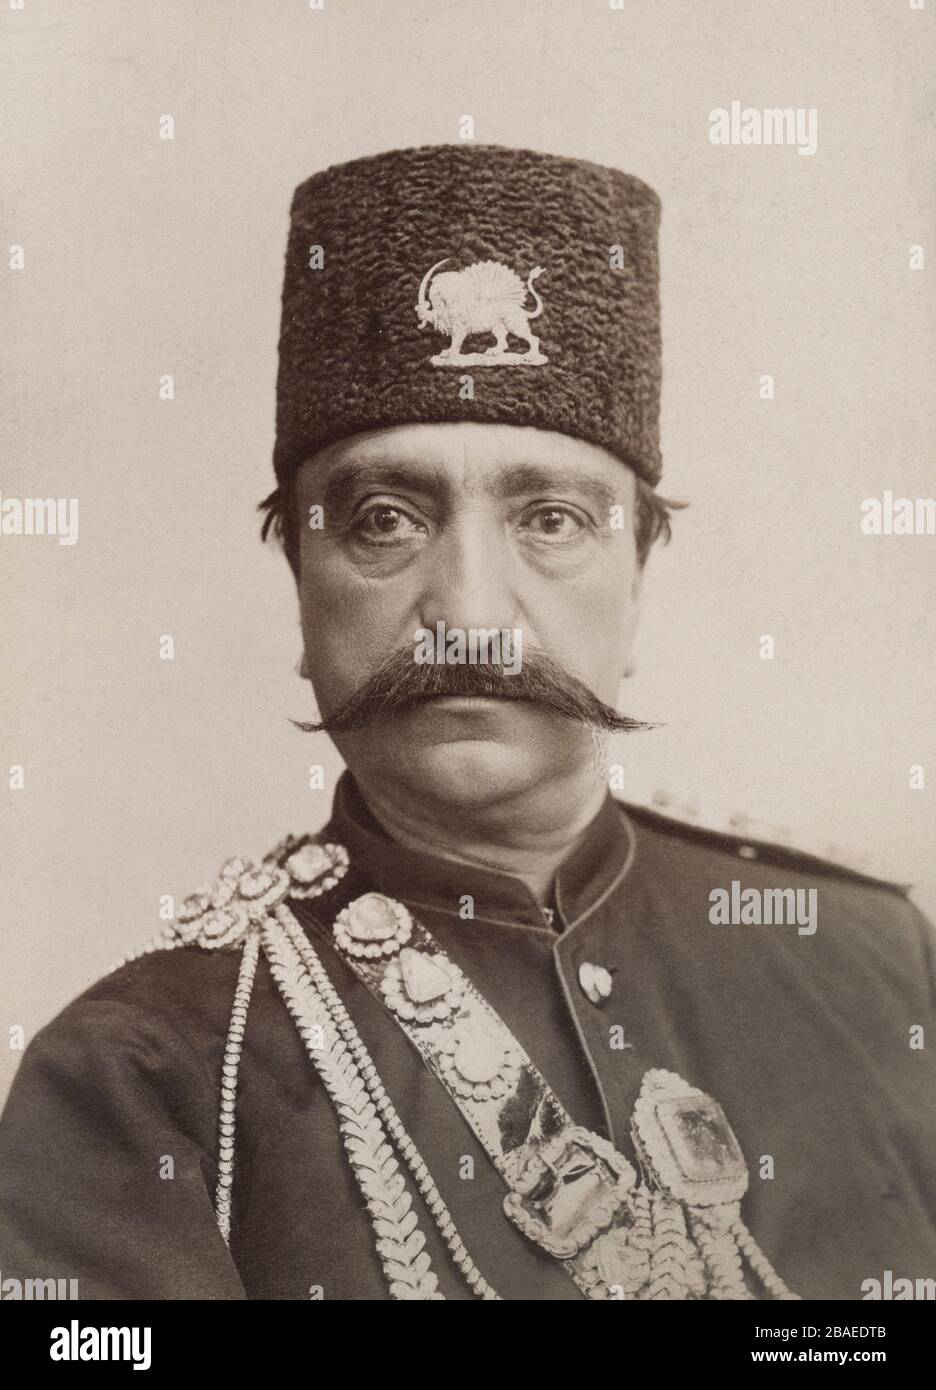 Shah of Persia Naser al-Din Shah Qajar (1831 – 1896), also Nassereddin Shah Qajar, was the King of Persia from 5 September 1848 to 1 May 1896 when he Stock Photo